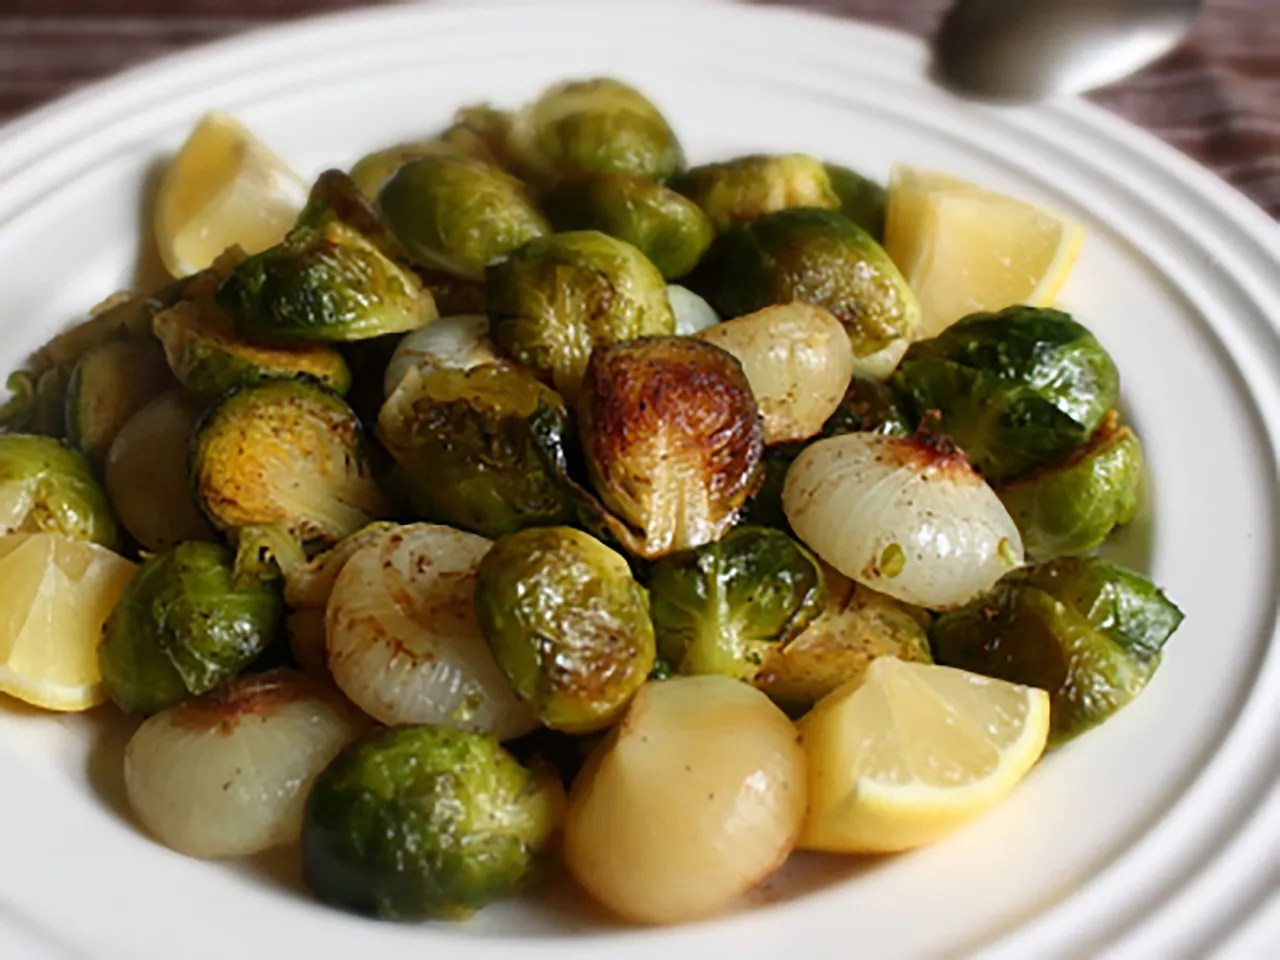 Addictive and Irresistible Roasted Brussels Sprouts!